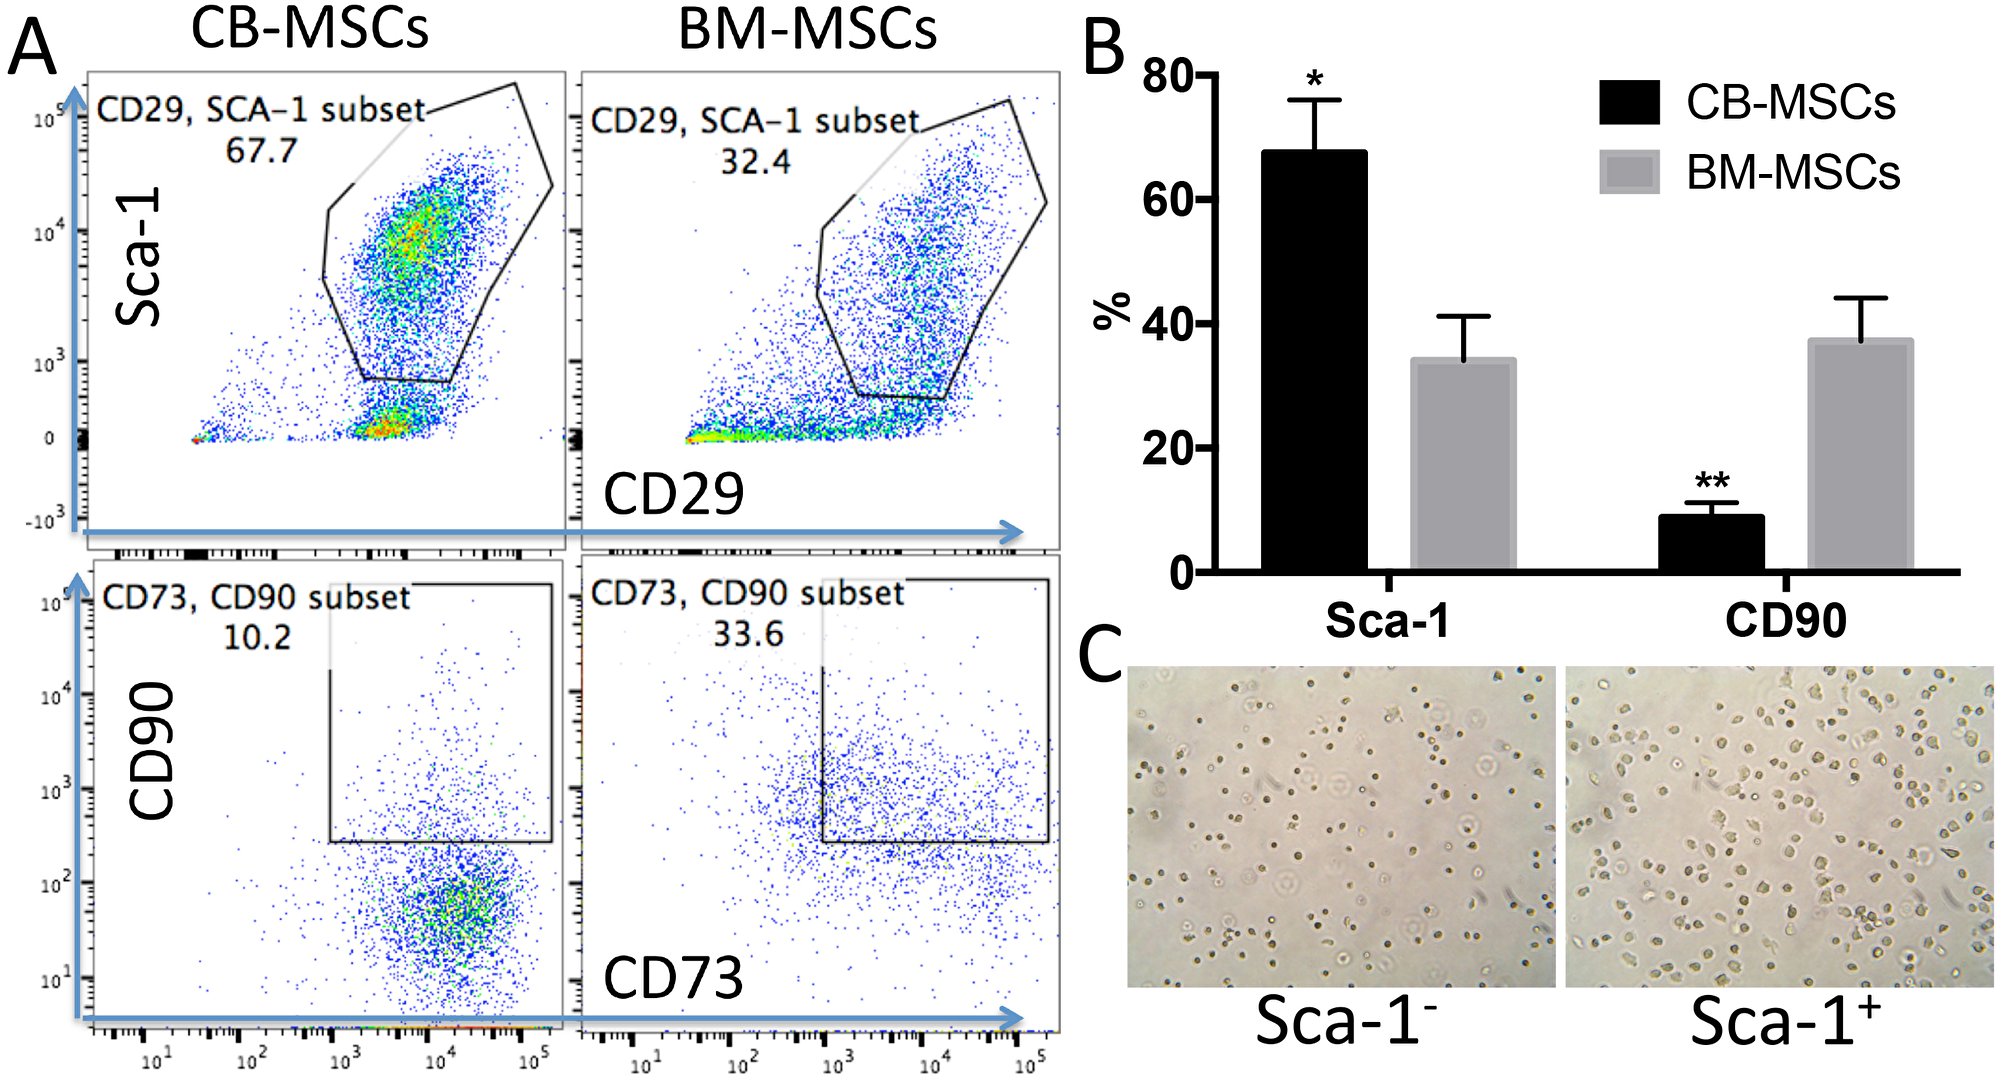 CB-MSCs express higher Sca-1 and lower CD90 compared to BM-MSCs.